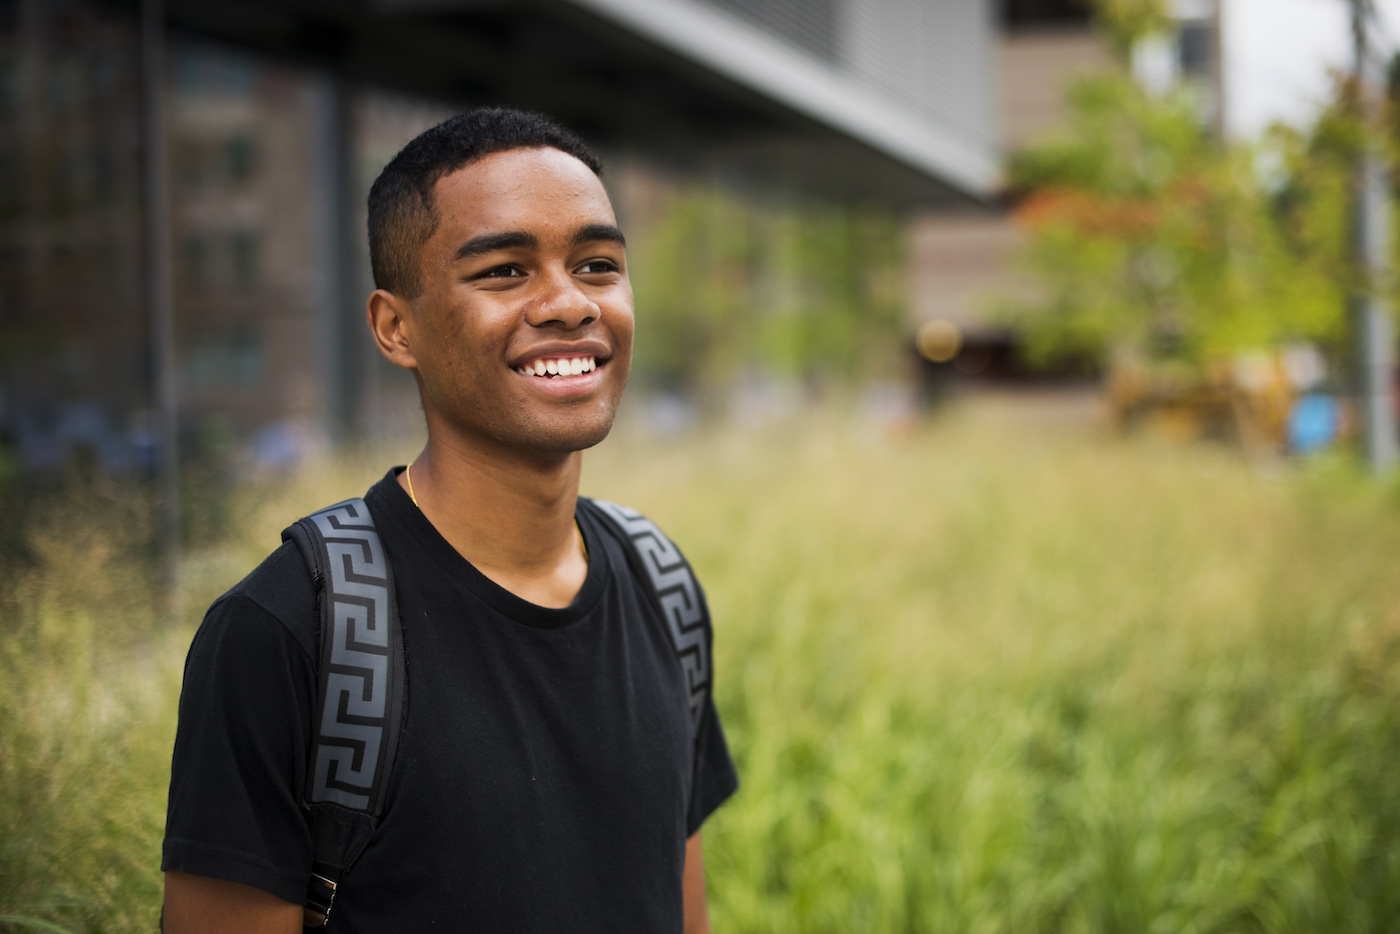 Edmon Berry, DMSB'19, poses for a portrait outside of ISEC on the first day of class on Sept. 6, 2017.